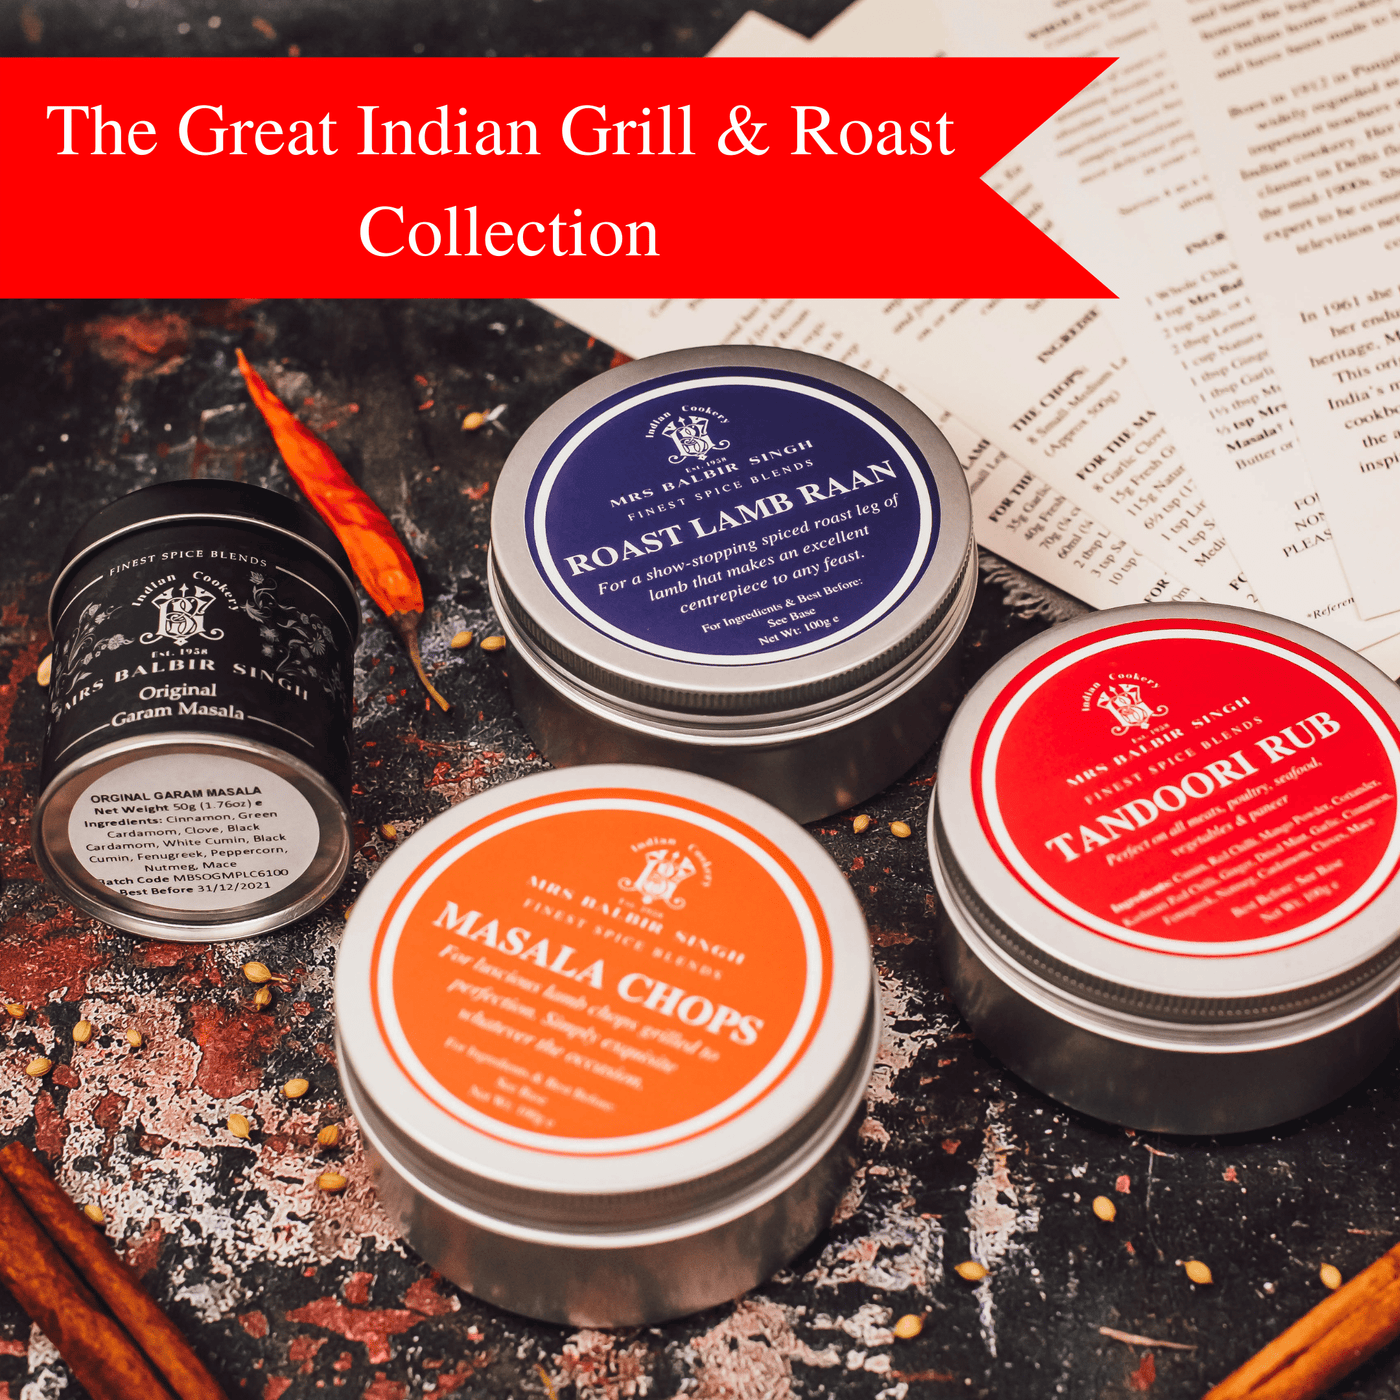 The Great Indian Grill & Roast Collection - Gourmet Indian Spice Blends by Mrs Balbir Singh®